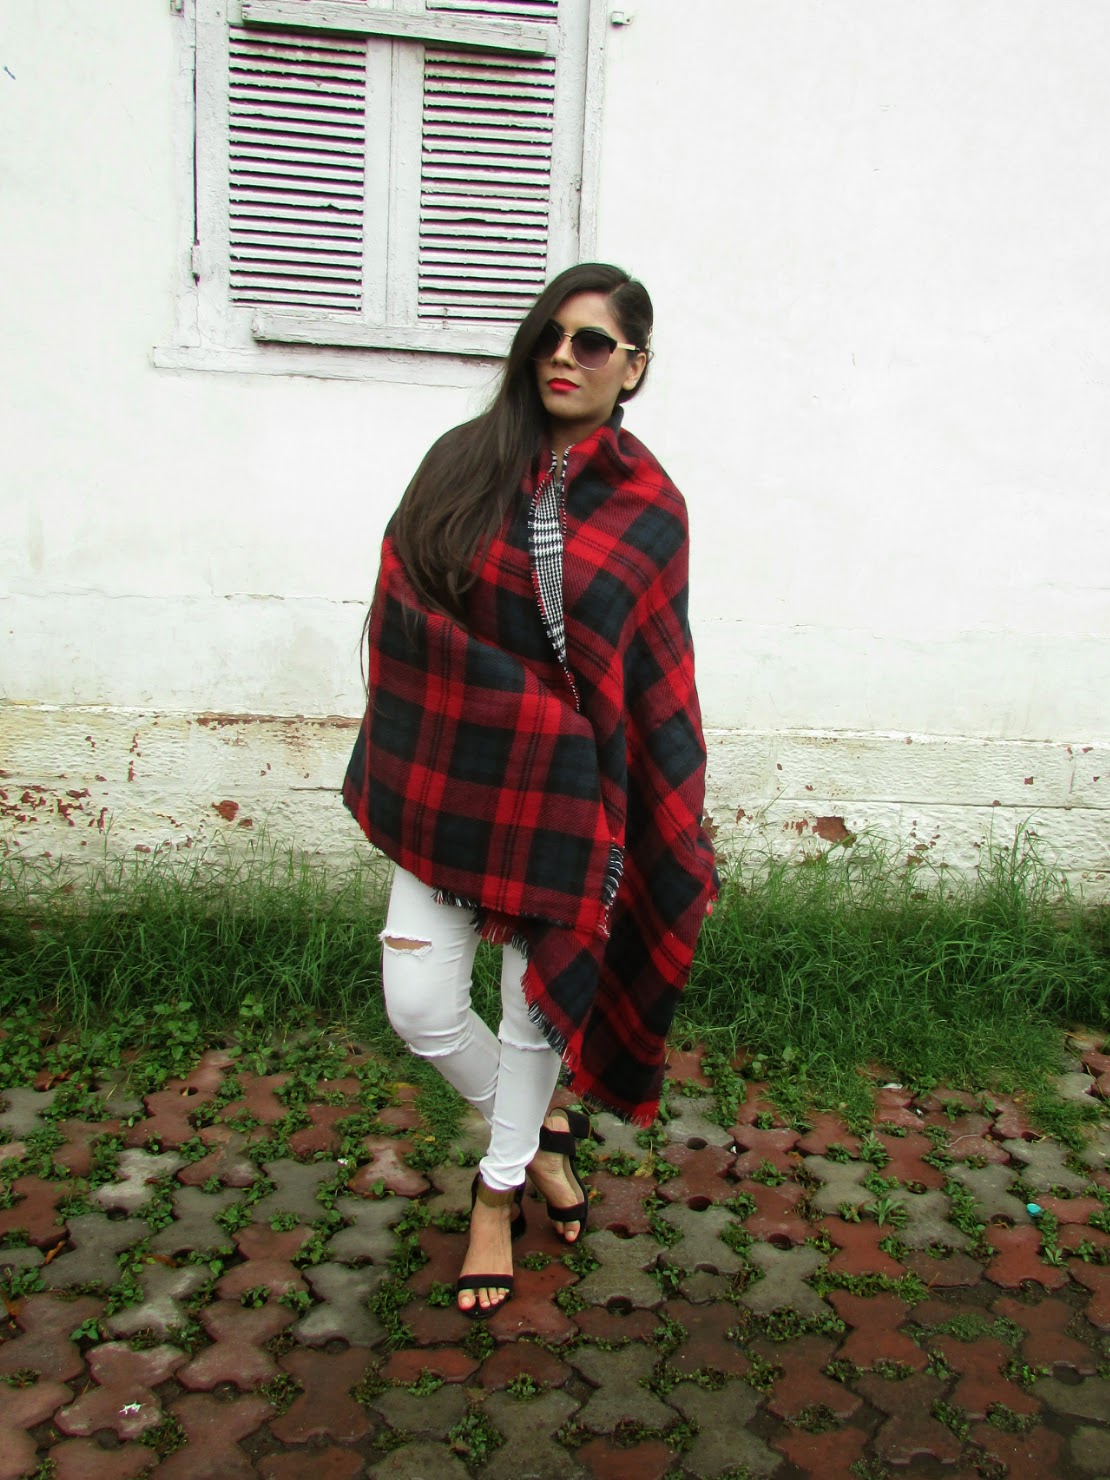 Plaid Tassel-Trim Scarf, plaid scarf, double sided plaid scarf, red plaid  scarf, black white plaid scarf, scarf cape, how to style plaid scarf, how to style cape, how to style plaid cape scarf, cheap scarf, oasap , oasap review, latest spring trends 2015, latest winter trend 2015,velvet leggings, how to style leggings, how to style velvet leggings, black velvet leggings, black leggings, fashion, winter trends 2015, black floral print leggings, Floral Detailed Skinny Leggings, cheap sunglasses india, cheap vintage sunglasses, fashion, OASAP, Sunglasses, vintage round sunglasses, vintage sunglasses,indian dahion bloggger, Statement necklace, necklace, statement necklaces, big necklace, heavy necklaces , gold necklace, silver necklace, silver statement necklace, gold statement necklace, studded statement necklace , studded necklace, stone studded necklace, stone necklace, stove studded statement necklace, stone statement necklace, stone studded gold statement necklace, stone studded silver statement necklace, black stone necklace, black stone studded statement necklace, black stone necklace, black stone statement necklace, neon statement necklace, neon stone statement necklace, black and silver necklace, black and gold necklace, blank and silver statement necklace, black and gold statement necklace, silver jewellery, gold jewellery, stove jewellery, stone studded jewellery, imitation jewellery, artificial jewellery, junk jewellery, cheap jewellery ,oasap Statement necklace, oasap necklace, oasap statement necklaces,oasap big necklace, oasap heavy necklaces , oasap gold necklace, oasap silver necklace, oasap silver statement necklace,oasap gold statement necklace, oasap studded statement necklace , oasap studded necklace, oasap stone studded necklace, oasap stone necklace, oasap stove studded statement necklace, oasap stone statement necklace, oasap stone studded gold statement necklace, oasap stone studded silver statement necklace, oasap black stone necklace, oasap black stone studded statement necklace, oasap black stone necklace, oasap black stone statement necklace, oasap neon statement necklace, oasap neon stone statement necklace, oasap black and silver necklace, oasap black and gold necklace, oasap black  and silver statement necklace, oasap black and gold statement necklace, silver jewellery, oasap gold jewellery, oasap stove jewellery, oasap stone studded jewellery, oasap imitation jewellery, oasap artificial jewellery, oasap junk jewellery, oasap cheap jewellery ,Cheap Statement necklace, Cheap necklace, Cheap statement necklaces,Cheap big necklace, Cheap heavy necklaces , Cheap gold necklace, Cheap silver necklace, Cheap silver statement necklace,Cheap gold statement necklace, Cheap studded statement necklace , Cheap studded necklace, Cheap stone studded necklace, Cheap stone necklace, Cheap stove studded statement necklace, Cheap stone statement necklace, Cheap stone studded gold statement necklace, Cheap stone studded silver statement necklace, Cheap black stone necklace, Cheap black stone studded statement necklace, Cheap black stone necklace, Cheap black stone statement necklace, Cheap neon statement necklace, Cheap neon stone statement necklace, Cheap black and silver necklace, Cheap black and gold necklace, Cheap black  and silver statement necklace, Cheap black and gold statement necklace, silver jewellery, Cheap gold jewellery, Cheap stove jewellery, Cheap stone studded jewellery, Cheap imitation jewellery, Cheap artificial jewellery, Cheap junk jewellery, Cheap cheap jewellery , Black pullover, black and grey pullover, black and white pullover, back cutout, back cutout pullover, back cutout sweater, back cutout jacket, back cutout top, back cutout tee, back cutout tee shirt, back cutout shirt, back cutout dress, back cutout trend, back cutout summer dress, back cutout spring dress, back cutout winter dress, High low pullover, High low sweater, High low jacket, High low top, High low tee, High low tee shirt, High low shirt, High low dress, High low trend, High low summer dress, High low spring dress, High low winter dress, oasap Black pullover, oasap black and grey pullover, oasap black and white pullover, oasap back cutout, oasap back cutout pullover, oasap back cutout sweater, oasap back cutout jacket, oasap back cutout top, oasap back cutout tee, oasap back cutout tee shirt, oasap back cutout shirt, oasap back cutout dress, oasap back cutout trend, oasap back cutout summer dress, oasap back cutout spring dress, oasap back cutout winter dress, oasap High low pullover, oasap High low sweater, oasap High low jacket, oasap High low top, oasap High low tee, oasap High low tee shirt, oasap High low shirt, oasap High low dress, oasap High low trend, oasap High low summer dress, oasap High low spring dress, oasap High low winter dress, Cropped, cropped tee,cropped tee shirt , cropped shirt, cropped sweater, cropped pullover, cropped cardigan, cropped top, cropped tank top, Cheap Cropped, cheap cropped tee,cheap cropped tee shirt ,cheap  cropped shirt, cheap cropped sweater, cheap cropped pullover, cheap cropped cardigan,cheap  cropped top, cheap cropped tank top, oasap Cropped, oasap cropped tee, oasap cropped tee shirt , oasap cropped shirt, oasap cropped sweater, oasap cropped pullover, oasap cropped cardigan, oasap cropped top, oasap cropped tank top, Winter Cropped, winter cropped tee, winter cropped tee shirt , winter cropped shirt, winter cropped sweater, winter cropped pullover, winter cropped cardigan, winter cropped top, winter cropped tank top,Leggings, winter leggings, warm leggings, winter warm leggings, fall leggings, fall warm leggings, tights, warm tights, winter tights, winter warm tights, fall tights, fall warm tights, oasap leggings, oasap tights, oasap warm leggings, oasap warm tights, oasap winter warm tights, oasap fall warm tights, woollen tights , woollen leggings, oasap woollen tights, oasap woollen leggings, woollen bottoms, oasap woollen bottoms, oasap woollen pants , woollen pants,  Christmas , Christmas leggings, Christmas tights, oasap Christmas, oasap Christmas clothes, clothes for Christmas , oasap Christmas leggings, oasap Christmas tights, oasap warm Christmas leggings, oasap warm Christmas  tights, oasap snowflake leggings, snowflake leggings, snowflake tights, oasap rain deer tights, oasap rain deer leggings, ugly Christmas sweater, Christmas tree, Christmas clothes, Santa clause,Wishlist, clothes wishlist, oasap wishlist, oasap, oasap.com, oasap.com wishlist, autumn wishlist,autumn oasap wishlist, autumn clothes wishlist, autumn shoes wishlist, autumn bags wishlist, autumn boots wishlist, autumn pullovers wishlist, autumn cardigans wishlist, autymn coats wishlist, persunmall clothes wishlist, oasap bags wishlist, oasap bags wishlist, oasap boots wishlist, oasap pullover wishlist, oasap cardigans wishlist, oasap autum clothes wishlist, winter clothes, wibter clothes wishlist, winter wishlist, wibter pullover wishlist, winter bags wishlist, winter boots wishlist, winter cardigans wishlist, winter leggings wishlist, oasap winter clothes, oasap autumn clothes, oasap winter collection, oasap autumn collection,Cheap clothes online,cheap dresses online, cheap jumpsuites online, cheap leggings online, cheap shoes online, cheap wedges online , cheap skirts online, cheap jewellery online, cheap jackets online, cheap jeans online, cheap maxi online, cheap makeup online, cheap cardigans online, cheap accessories online, cheap coats online,cheap brushes online,cheap tops online, chines clothes online, Chinese clothes,Chinese jewellery ,Chinese jewellery online,Chinese heels online,Chinese electronics online,Chinese garments,Chinese garments online,Chinese products,Chinese products online,Chinese accessories online,Chinese inline clothing shop,Chinese online shop,Chinese online shoes shop,Chinese online jewellery shop,Chinese cheap clothes online,Chinese  clothes shop online, korean online shop,korean garments,korean makeup,korean makeup shop,korean makeup online,korean online clothes,korean online shop,korean clothes shop online,korean dresses online,korean dresses online,cheap Chinese clothes,cheap korean clothes,cheap Chinese makeup,cheap korean makeup,cheap korean shopping ,cheap Chinese shopping,cheap Chinese online shopping,cheap korean online shopping,cheap Chinese shopping website,cheap korean shopping website, cheap online shopping,online shopping,how to shop online ,how to shop clothes online,how to shop shoes online,how to shop jewellery online,how to shop mens clothes online, mens shopping online,boys shopping online,boys jewellery online,mens online shopping,mens online shopping website,best Chinese shopping website, Chinese online shopping website for men,best online shopping website for women,best korean online shopping,best korean online shopping website,korean fashion,korean fashion for women,korean fashion for men,korean fashion for girls,korean fashion for boys,best chinese online shopping,best chinese shopping website,best chinese online shopping website,wholesale chinese shopping website,wholesale shopping website,chinese wholesale shopping online,chinese wholesale shopping, chinese online shopping on wholesale prices, clothes on wholesale prices,cholthes on wholesake prices,clothes online on wholesales prices,online shopping, online clothes shopping, online jewelry shopping,how to shop online, how to shop clothes online, how to shop earrings online, how to shop,skirts online, dresses online,jeans online, shorts online, tops online, blouses online,shop tops online, shop blouses online, shop skirts online, shop dresses online, shop botoms online, shop summer dresses online, shop bracelets online, shop earrings online, shop necklace online, shop rings online, shop highy low skirts online, shop sexy dresses onle, men's clothes online, men's shirts online,men's jeans online, mens.s jackets online, mens sweaters online, mens clothes, winter coats online, sweaters online, cardigens online,beauty , fashion,beauty and fashion,beauty blog, fashion blog , indian beauty blog,indian fashion blog, beauty and fashion blog, indian beauty and fashion blog, indian bloggers, indian beauty bloggers, indian fashion bloggers,indian bloggers online, top 10 indian bloggers, top indian bloggers,top 10 fashion bloggers, indian bloggers on blogspot,home remedies, how to,oasap online shopping,oasap online shopping review,oasap.com review,oasap online clothing store,oasap online chinese store,oasap online shopping,oasap site review,oasap.com site review, oasap Chines fashion, persunmall , oasap.com, oasap clothing, oasap dresses, oasap shoes, oasap accessories,oasap men cloths ,oasap makeup, oasap helth products,oasap Chinese online shopping, oasap Chinese store, oasap online chinese shopping, oasap lchinese shopping online,oasap, oasap dresses, oasap clothes, oasap garments, oasap clothes, oasap skirts, oasap pants, oasap tops, oasap cardigans, oasap leggings, oasap fashion , oasap clothes fashion, oasap footwear, oasap fashion footwear, oasap jewellery, oasap fashion jewellery, oasap rings, oasap necklace, oasap bracelets, oasap earings,Autumn, fashion, oasap, wishlist,Winter,fall, fall abd winter, winter clothes , fall clothes, fall and winter clothes, fall jacket, winter jacket, fall and winter jacket, fall blazer, winter blazer, fall and winter blazer, fall coat , winter coat, falland winter coat, fall coverup, winter coverup, fall and winter coverup, outerwear, coat , jacket, blazer, fall outerwear, winter outerwear, fall and winter outerwear, woolen clothes, wollen coat, woolen blazer, woolen jacket, woolen outerwear, warm outerwear, warm jacket, warm coat, warm blazer, warm sweater, coat , white coat, white blazer, white coat, white woolen blazer, white coverup, white woolens,oasap online shopping review,oasap.com review,oasap online clothing store,oasap online chinese store,oasap online shopping,oasap site review,oasap.com site review, oasap Chines fashion, oasap , oasap.com, oasap clothing, oasap dresses, oasap shoes, oasap accessories,oasap men cloths ,oasap makeup, oasap helth products,oasap Chinese online shopping, oasap Chinese store, oasap online chinese shopping, oasap chinese shopping online,oasap, oasap dresses, oasap clothes, oasap garments, oasap clothes, oasap skirts, persunmall pants, oasap tops, oasap cardigans, oasap leggings, oasap fashion , oasap clothes fashion, oasap footwear, oasap fashion footwear, oasap jewellery, oasap fashion jewellery, oasap rings, oasap necklace, oasap bracelets, oasap earings,latest fashion trends online, online shopping, online shopping in india, online shopping in india from america, best online shopping store , best fashion clothing store, best online fashion clothing store, best online jewellery store, best online footwear store, best online store, beat online store for clothes, best online store for footwear, best online store for jewellery, best online store for dresses, worldwide shipping free, free shipping worldwide, online store with free shipping worldwide,best online store with worldwide shipping free,low shipping cost, low shipping cost for shipping to india, low shipping cost for shipping to asia, low shipping cost for shipping to korea,Friendship day , friendship's day, happy friendship's day, friendship day outfit, friendship's day outfit, how to wear floral shorts, floral shorts, styling floral shorts, how to style floral shorts, how to wear shorts, how to style shorts, how to style style denim shorts, how to wear denim shorts,how to wear printed shorts, how to style printed shorts, printed shorts, denim shorts, how to style black shorts, how to wear black shorts, how to wear black shorts with black T-shirts, how to wear black T-shirt, how to style a black T-shirt, how to wear a plain black T-shirt, how to style black T-shirt,how to wear shorts and T-shirt, what to wear with floral shorts, what to wear with black floral shorts,how to wear all black outfit, what to wear on friendship day, what to wear on a date, what to wear on a lunch date, what to wear on lunch, what to wear to a friends house, what to wear on a friends get together, what to wear on friends coffee date , what to wear for coffee,beauty,Pink, pink pullover, pink sweater, pink jumpsuit, pink sweatshirt, neon pink, neon pink sweater, neon pink pullover, neon pink jumpsuit , neon pink cardigan, cardigan , pink cardigan, sweater, jumper, jumpsuit, pink jumper, neon pink jumper, pink jacket, neon pink jacket, winter clothes, oversized coat, oversized winter clothes, oversized pink coat, oversized coat, oversized jacket, oasap pink, oasap pink sweater, oasap pink jacket, oasap pink cardigan, oasap pink coat, oasap pink jumper, oasap neon pink, oasap neon pink jacket, oasap neon pink coat, oasap neon pink sweater, oasap neon pink jumper, oasap neon pink pullover, pink pullover, neon pink pullover,fur,furcoat,furjacket,furblazer,fur pullover,fur cardigan,front open fur coat,front open fur jacket,front open fur blazer,front open fur pullover,front open fur cardigan,real fur, real fur coat,real fur jacket,real fur blazer,real fur pullover,real fur cardigan, soft fur,soft fur coat,soft fur jacket,soft furblazer,soft fur pullover,sof fur cardigan, white fur,white fur coat,white fur jacket,white fur blazer, white fur pullover, white fur cardigan,trench, trench coat, trench coat online, trench coat india, trench coat online India, trench cost price, trench coat price online, trench coat online price, cheap trench coat, cheap trench coat online, cheap trench coat india, cheap trench coat online India, cheap trench coat , Chinese trench coat, Chinese coat, cheap Chinese trench coat, Korean coat, Korean trench coat, British coat, British trench coat, British trench coat online, British trench coat online, New York trench coat, New York trench coat online, cheap new your trench coat, American trench coat, American trench coat online, cheap American trench coat, low price trench coat, low price trench coat online , low price trench coat online india, low price trench coat india, oasap trench, oasap trench coat, oasap trench coat online, oasap trench coat india, oasap trench coat online India, oasap trench cost price,oasap trench coat price online, oasap trench coat online price, oasap cheap trench coat, oasap cheap trench coat online, oasap cheap trench coat india, oasap cheap trench coat online India, oasap cheap trench coat , oasap Chinese trench coat, oasap Chinese coat, oasap cheap Chinese trench coat, oasap Korean coat, oasap Korean trench coat, oasap British coat, oasap British trench coat, oasap British trench coat online, oasap British trench coat online, oasap New York trench coat, oasap New York trench coat online, oasap cheap new your trench coat, oasap American trench coat, oasap American trench coat online, oasap cheap American trench coat, oasap low price trench coat, oasap low price trench coat online , oasap low price trench coat online india, oasap low price trench coat india, how to wear trench coat, how to wear trench, how to style trench coat, how to style coats, how to style long coats, how to style winter coats, how to style winter trench coats, how to style winter long coats, how to style warm coats, how to style beige coat, how to style beige long coat, how to style beige trench coat, how to style beige coat, beige coat, beige long coat, beige long coat, beige frock coat, beige double breasted coat, double breasted coat, how to style frock coat, how to style double breasted coat, how to wear beige trench coat,how to wear beige coat, how to wear beige long coat, how to wear beige frock coat, how to wear beige double button coat, how to wear beige double breat coat, double button coat, what us trench coat, uses of trench coat, what is frock coat, uses of frock coat, what is long coat, uses of long coat, what is double breat coat, uses of double breasted coat, what is bouton up coat, uses of button up coat, what is double button coat, uses of double button coat, velvet leggings, velvet tights, velvet bottoms, embroided velvet leggings, embroided velvet tights, pattern tights, velvet pattern tights, floral tights , floral velvet tights, velvet floral tights, embroided  velvet leggings, pattern leggings , velvet pattern leggings , floral leggings , floral velvet leggings, velvet floral leggings ,oasap velvet leggings, oasap velvet tights, oasap velvet bottoms,oasap embroided velvet leggings,oasap embroided velvet tights, oasap pattern tights, oasap velvet pattern tights, oasap floral tights , oasap floral velvet tights, oasap velvet floral tights, oasap embroided  velvet leggings, oasap pattern leggings , oasap velvet pattern leggings , oasap floral leggings ,oasap floral velvet leggings, oasap velvet floral leggings ,statement necklace, stone statement necklace, multi colored necklace, zahara jani jewelry, cheap jewelry online, fashion, fashion jewelry india, cheap statement necklace online , how to style statement necklace, how to match jewelry,Statement necklace, necklace, statement necklaces, big necklace, heavy necklaces , gold necklace, silver necklace, silver statement necklace, gold statement necklace, studded statement necklace , studded necklace, stone studded necklace, stone necklace, stove studded statement necklace, stone statement necklace, stone studded gold statement necklace, stone studded silver statement necklace, black stone necklace, black stone studded statement necklace, black stone necklace, black stone statement necklace, neon statement necklace, neon stone statement necklace, black and silver necklace, black and gold necklace, blank and silver statement necklace, black and gold statement necklace, silver jewellery, gold jewellery, stove jewellery, stone studded jewellery, imitation jewellery, artificial jewellery, junk jewellery, cheap jewellery , zahrajani Statement necklace, zahrajani necklace, zahrajani statement necklaces,zahrajani big necklace, zahrajani heavy necklaces , zahrajani gold necklace, zahrajani silver necklace, zahrajani silver statement necklace,zahrajani gold statement necklace, zahrajani studded statement necklace , zahrajani studded necklace, zahrajani stone studded necklace, zahrajani stone necklace, zahrajani stove studded statement necklace, zahrajani stone statement necklace, zahrajani stone studded gold statement necklace, zahrajani stone studded silver statement necklace, zahrajani black stone necklace, zahrajani black stone studded statement necklace, zahrajani black stone necklace, zahrajani black stone statement necklace, zahrajani neon statement necklace, zahrajani neon stone statement necklace, zahrajani black and silver necklace, zahrajani black and gold necklace, zahrajani black  and silver statement necklace, zahrajani black and gold statement necklace, silver jewellery, zahrajani gold jewellery, zahrajani stove jewellery, zahrajani stone studded jewellery, zahrajani imitation jewellery, zahrajani artificial jewellery, zahrajani junk jewellery, vcheap jewellery ,Cheap Statement necklace, Cheap necklace, Cheap statement necklaces,Cheap big necklace, Cheap heavy necklaces , Cheap gold necklace, Cheap silver necklace, Cheap silver statement necklace,Cheap gold statement necklace, Cheap studded statement necklace , Cheap studded necklace, Cheap stone studded necklace, Cheap stone necklace, Cheap stove studded statement necklace, Cheap stone statement necklace, Cheap stone studded gold statement necklace, Cheap stone studded silver statement necklace, Cheap black stone necklace, Cheap black stone studded statement necklace, Cheap black stone necklace, Cheap black stone statement necklace, Cheap neon statement necklace, Cheap neon stone statement necklace, Cheap black and silver necklace, Cheap black and gold necklace, Cheap black  and silver statement necklace, Cheap black and gold statement necklace, silver jewellery, Cheap gold jewellery, Cheap stove jewellery, Cheap stone studded jewellery, Cheap imitation jewellery, Cheap artificial jewellery, Cheap junk jewellery, Cheap cheap jewellery ,Giveaway, giveaways,clothes giveaway, clothes giveaways, shoes giveaways, jewellery giveaway, jewellery giveaways, online clothes giveaway, online shoes giveaway, online jewellery giveaway, , clothes and shoes giveaway , clothes and jewellery giveaway, jewellery and shoes giveaway, online shoes and clothes giveaway,online jewellery and clothes giveaway, free clothes , free shoes, free jewellery, free clothes and shoes, free clothes and jewellery, free shoes and jewellery giveaway,Black sunglasses, black sunnies, mirrored sunnies, mirrored sunglasses, sunglasses, sunnies, how to wear sunnies, how to wear sunglasses, how to wear mirrored sunglasses, how to wear mirrored sunnies, how to wear sunglasses in winter, how to wear sunglasses at night, how to wear sunnies at night, how to wear sunnies in winter, best sunglasses, best sunnies, best mirrored sunnies, best mirrored sunglasses, best sunglasses online, best sunnies online, best mirrored sunnies online, best mirrored sunglasses online, cheap mirrored sunglasses, cheap mirrored sunnies, cheap mirrored sunglasses online, cheap mirrored sunnies online, cost of mirrored sunnies, cost of mirrored sunglasses, cost of mirrored sunglasses online, cost of mirrored sunnies online, black sunglasses by zahrajani , black sunnies by zahrajani , zahrajani sunglasses, cost of sunglasses by zahrajani , cheap sunglasses at zahrajani , cheap sunnies at zahrajani , cost of sunglasses of zahrajani , cost of sunnies at zahrajani , mirrored sunnies at Choies, mirrored sunglasses at zahrajani , cheap mirrored sunglasses at zahrajani , cheap mirrored sunnies at choirs, cost of mirrored sunglasses at Choies, cost of mirrored sunnies at zahrajani ,Chinese jewellery ,Chinese jewellery online,Chinese heels online,Chinese electronics online,Chinese garments,Chinese garments online,Chinese products,Chinese products online,Chinese accessories online,Chinese inline clothing shop,Chinese online shop,Chinese online shoes shop,Chinese online jewellery shop,Chinese cheap clothes online,Chinese  clothes shop online, korean online shop,korean garments,korean makeup,korean makeup shop,korean makeup online,korean online clothes,korean online shop,korean clothes shop online,korean dresses online,korean dresses online,cheap Chinese clothes,cheap korean clothes,cheap Chinese makeup,cheap korean makeup,cheap korean shopping ,cheap Chinese shopping,cheap Chinese online shopping,cheap korean online shopping,cheap Chinese shopping website,cheap korean shopping website, cheap online shopping,online shopping,how to shop online ,how to shop clothes online,how to shop shoes online,how to shop jewellery online,how to shop mens clothes online, mens shopping online,boys shopping online,boys jewellery online,mens online shopping,mens online shopping website,best Chinese shopping website, Chinese online shopping website for men,best online shopping website for women,best korean online shopping,best korean online shopping website,korean fashion,korean fashion for women,korean fashion for men,korean fashion for girls,korean fashion for boys,wholesale chinese shopping website,wholesale shopping website,chinese wholesale shopping online,chinese wholesale shopping, chinese online shopping on wholesale prices, clothes on wholesale prices,cholthes on wholesake prices,clothes online on wholesales prices,online shopping, online clothes shopping, online jewelry shopping,how to shop online, how to shop clothes online, how to shop earrings online, how to shop,skirts online, dresses online,jeans online, shorts online, tops online, blouses online,shop tops online, shop blouses online, shop skirts online, shop dresses online, shop botoms online, shop summer dresses online, shop bracelets online, shop earrings online, shop necklace online, shop rings online, shop highy low skirts online, shop sexy dresses onle, men's clothes online, men's shirts online,men's jeans online, mens.s jackets online, mens sweaters online, mens clothes, winter coats online, sweaters online, cardigens online,beauty , fashion,beauty and fashion,beauty blog, fashion blog , indian beauty blog,indian fashion blog, beauty and fashion blog, indian beauty and fashion blog, indian bloggers, indian beauty bloggers, indian fashion bloggers,indian bloggers online, top 10 indian bloggers, top indian bloggers,top 10 fashion bloggers, indian bloggers on blogspot,home remedies, how to,Winter,fall, fall abd winter, winter clothes , fall clothes, fall and winter clothes, fall jacket, winter jacket, fall and winter jacket, fall blazer, winter blazer, fall and winter blazer, fall coat , winter coat, falland winter coat, fall coverup, winter coverup, fall and winter coverup, outerwear, coat , jacket, blazer, fall outerwear, winter outerwear, fall and winter outerwear, woolen clothes, wollen coat, woolen blazer, woolen jacket, woolen outerwear, warm outerwear, warm jacket, warm coat, warm blazer, warm sweater, coat , white coat, white blazer, white coat, white woolen blazer,choies online shopping review,choies.com review,choies online clothing store,choies online chinese store,choies online shopping,choies site review,choies.com site review, choies Chines fashion, choies , choies com, choies clothing, choies dresses, choies shoes, choies accessories,choiesmen cloths ,choies makeup, choies helth products,choies Chinese online shopping, choies Chinese store, choies online chinese shopping, choies hinese shopping online,choies, choies dresses, zahrajani clothes, choies garments, choies clothes, choies skirts, choies pants, choies tops, choies cardigans, choies leggings, choies fashion , choies clothes fashion, choies footwear, choies fashion footwear, choies jewellery, choies fashion jewellery, choies rings, choies necklace, choies bracelets, choies earings,Autumn, fashion,choies 